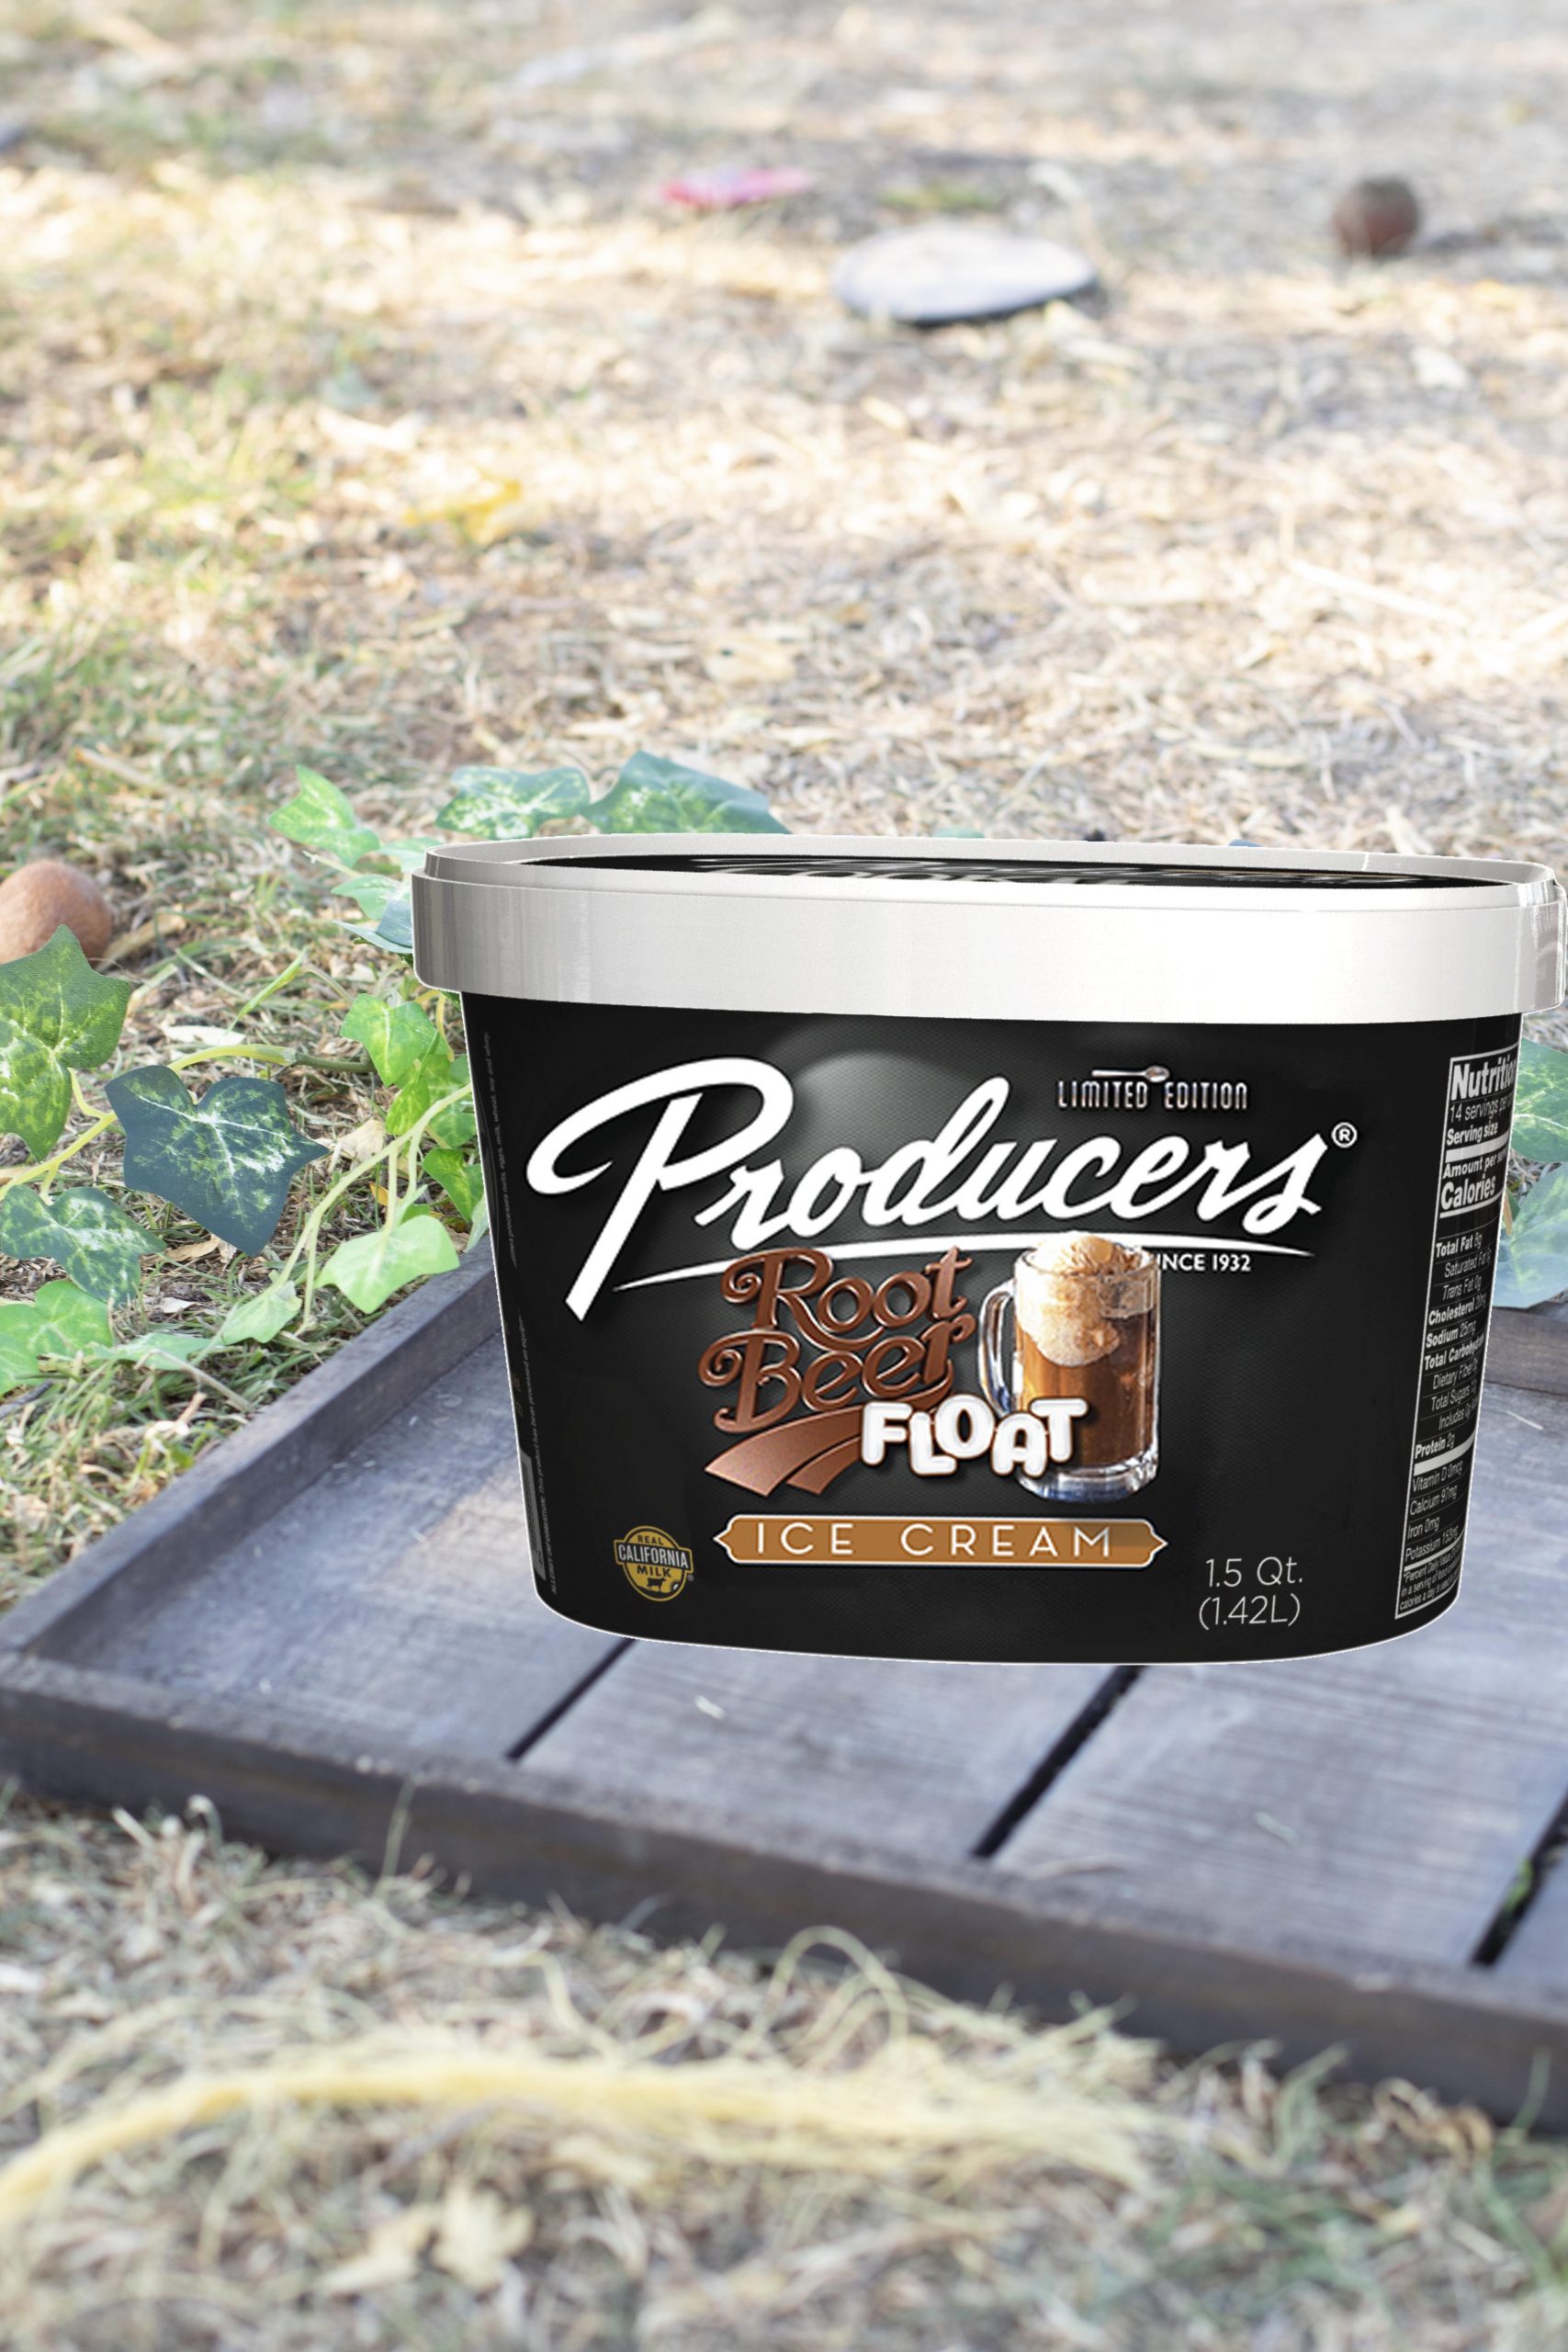 Root Beer Float Producers Ice Cream Container sitting on wood on top of grass.